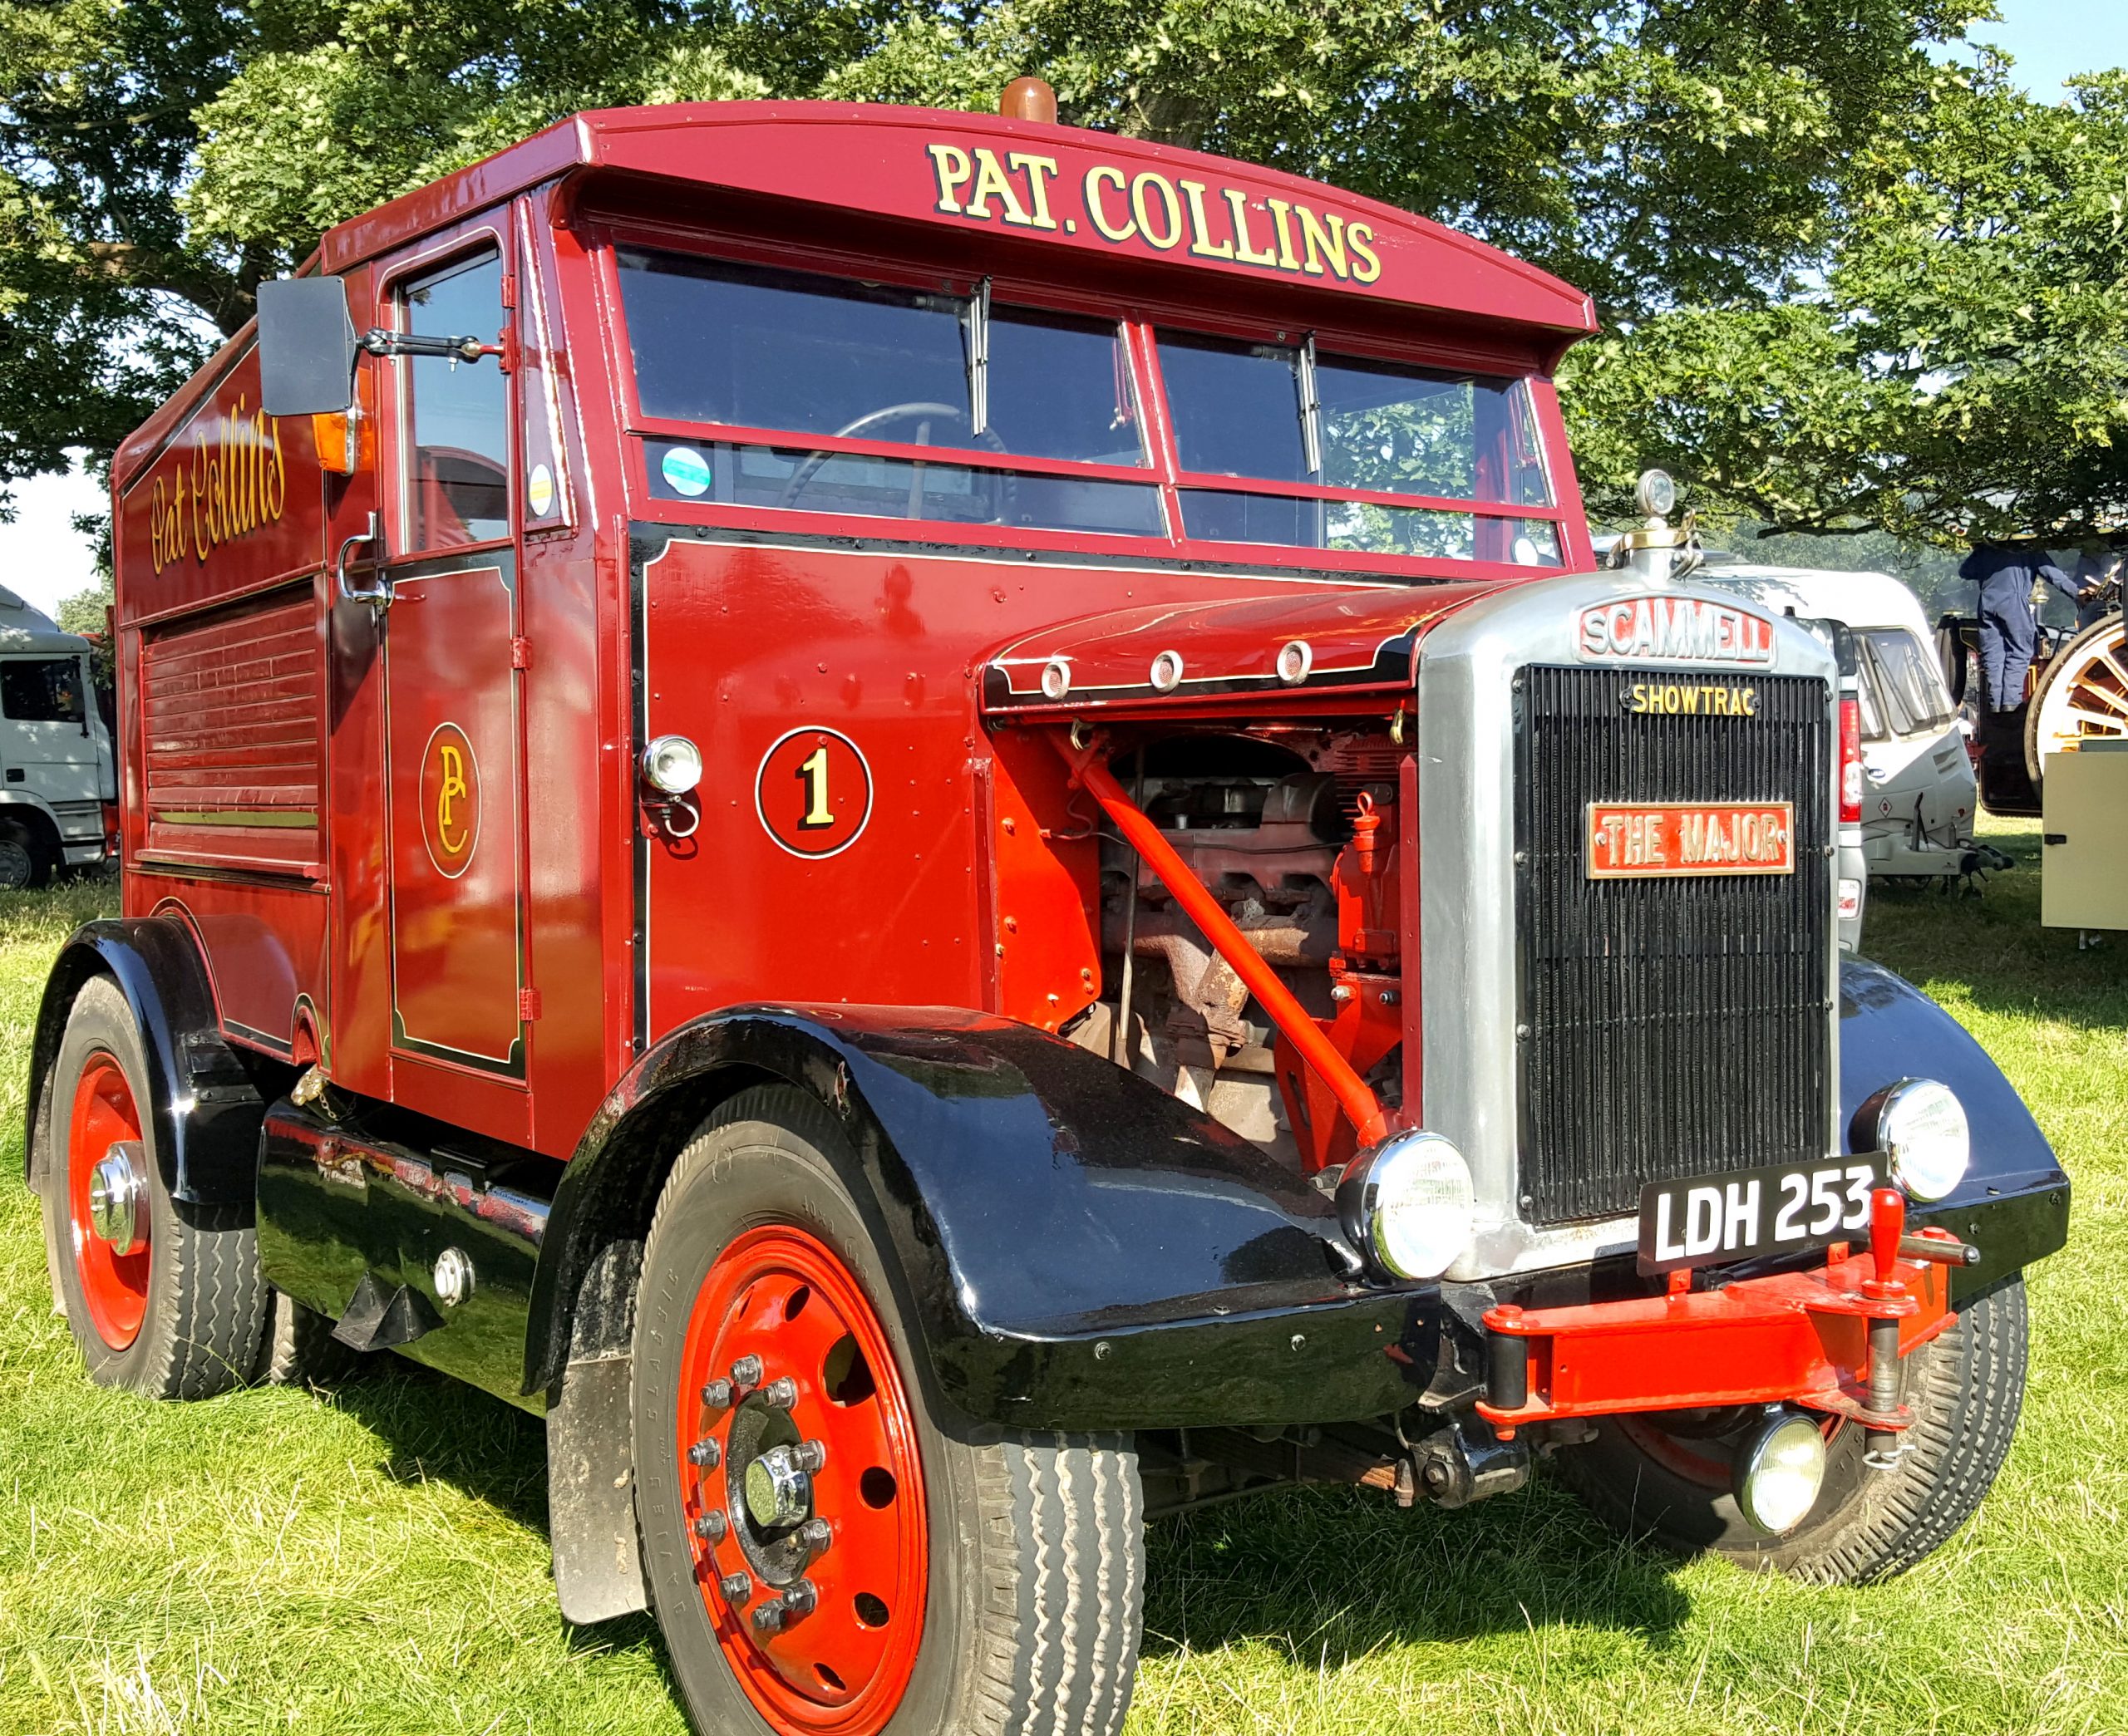 Pat-Collins-Classic-Scammell-truck-Showtrac-The-Major-scaled